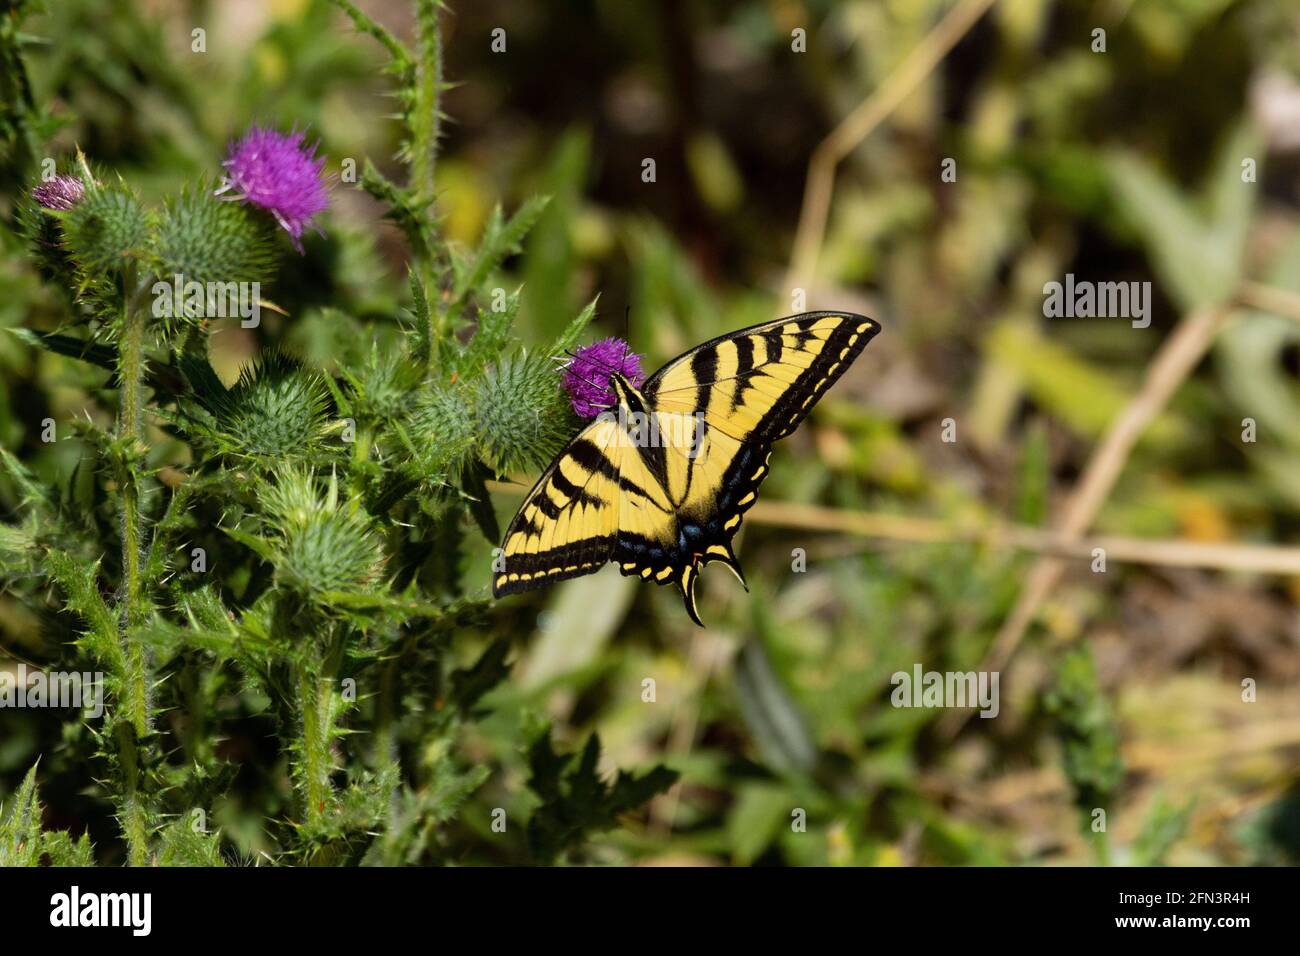 Western Tiger Swallowtail butterfly feeds on invasive thistle blossom, San Joaquin Valley, Merced County, California Stock Photo